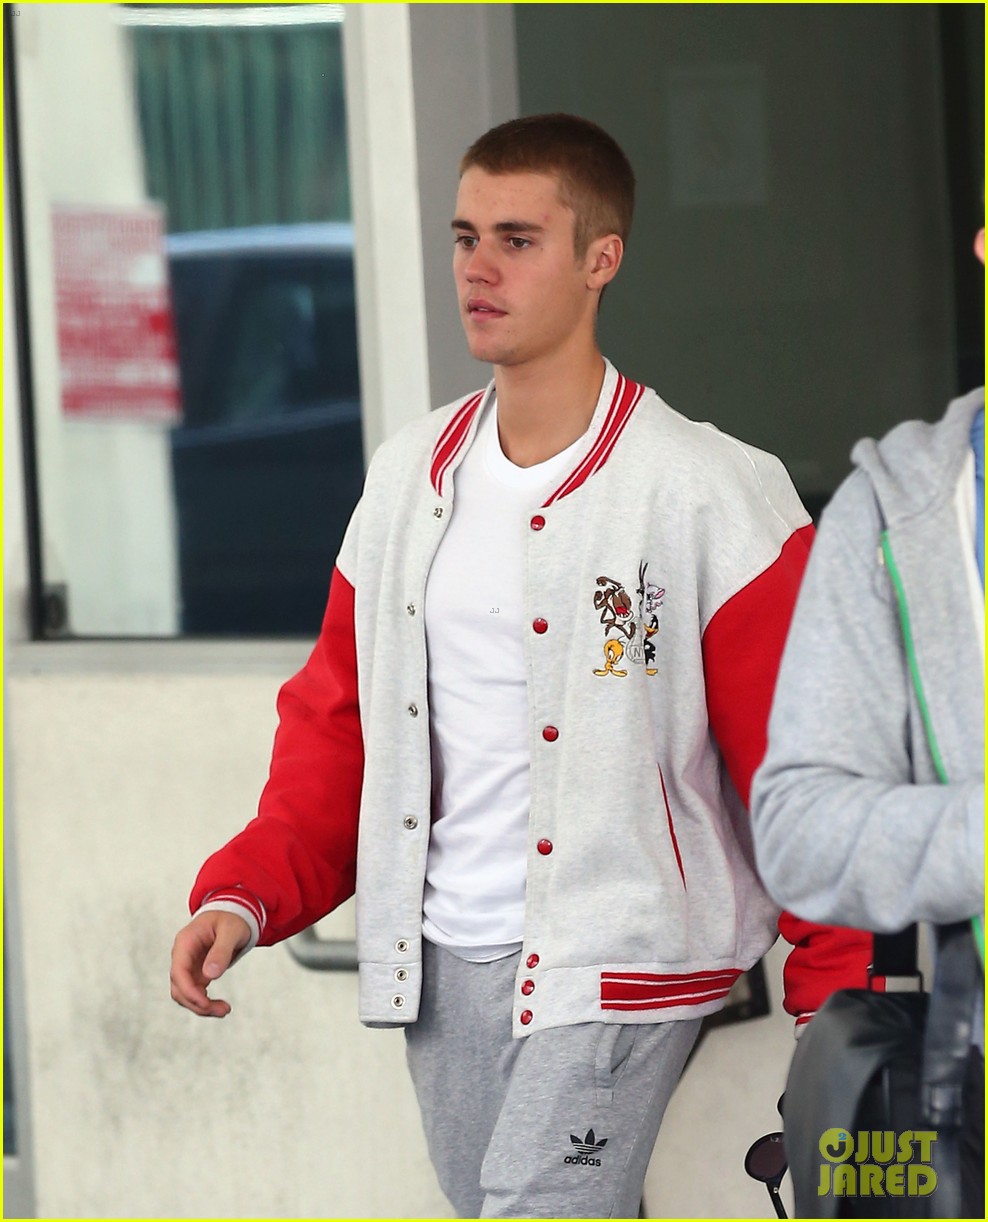 justin bieber joins pick up basketball game on venice beach 12